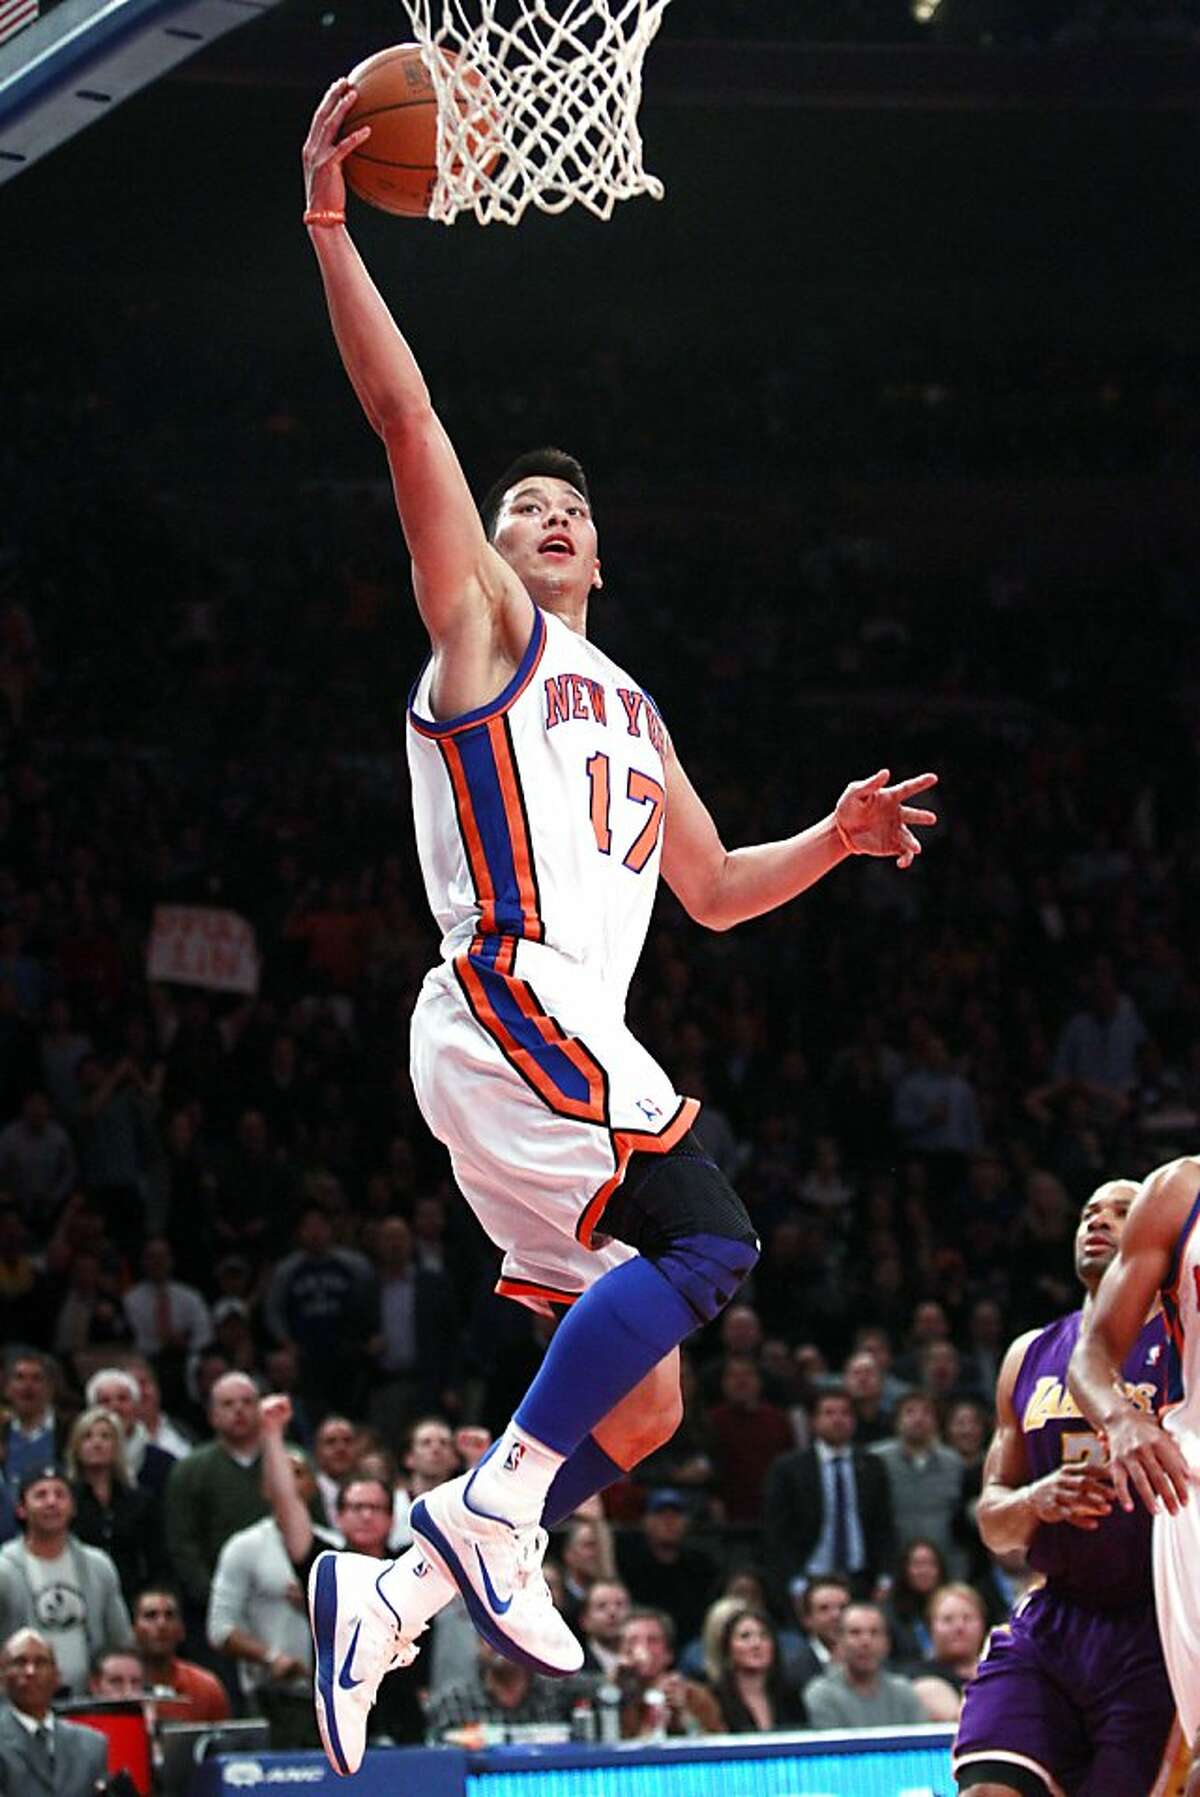 New York Knicks' Jeremy Lin (17) drives past Los Angeles Lakers' Derek Fisher during the first half of an NBA basketball game, Friday, Feb. 10, 2012, in New York. (AP Photo/Frank Franklin II)